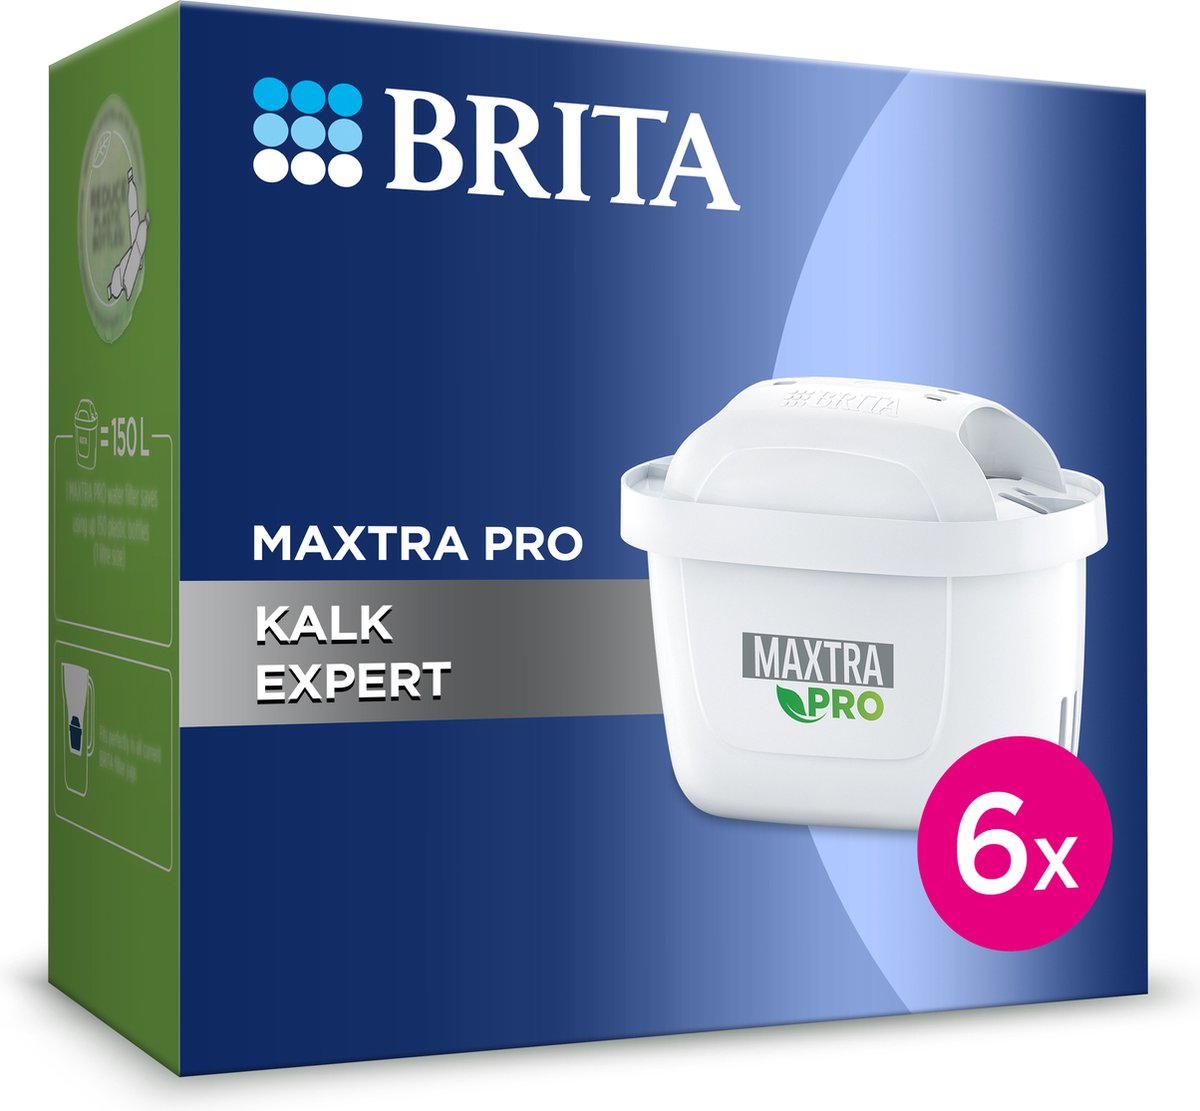 Brita - Waterfilterpatroon - MAXTRA Pro Limescale Expert - 6Pack